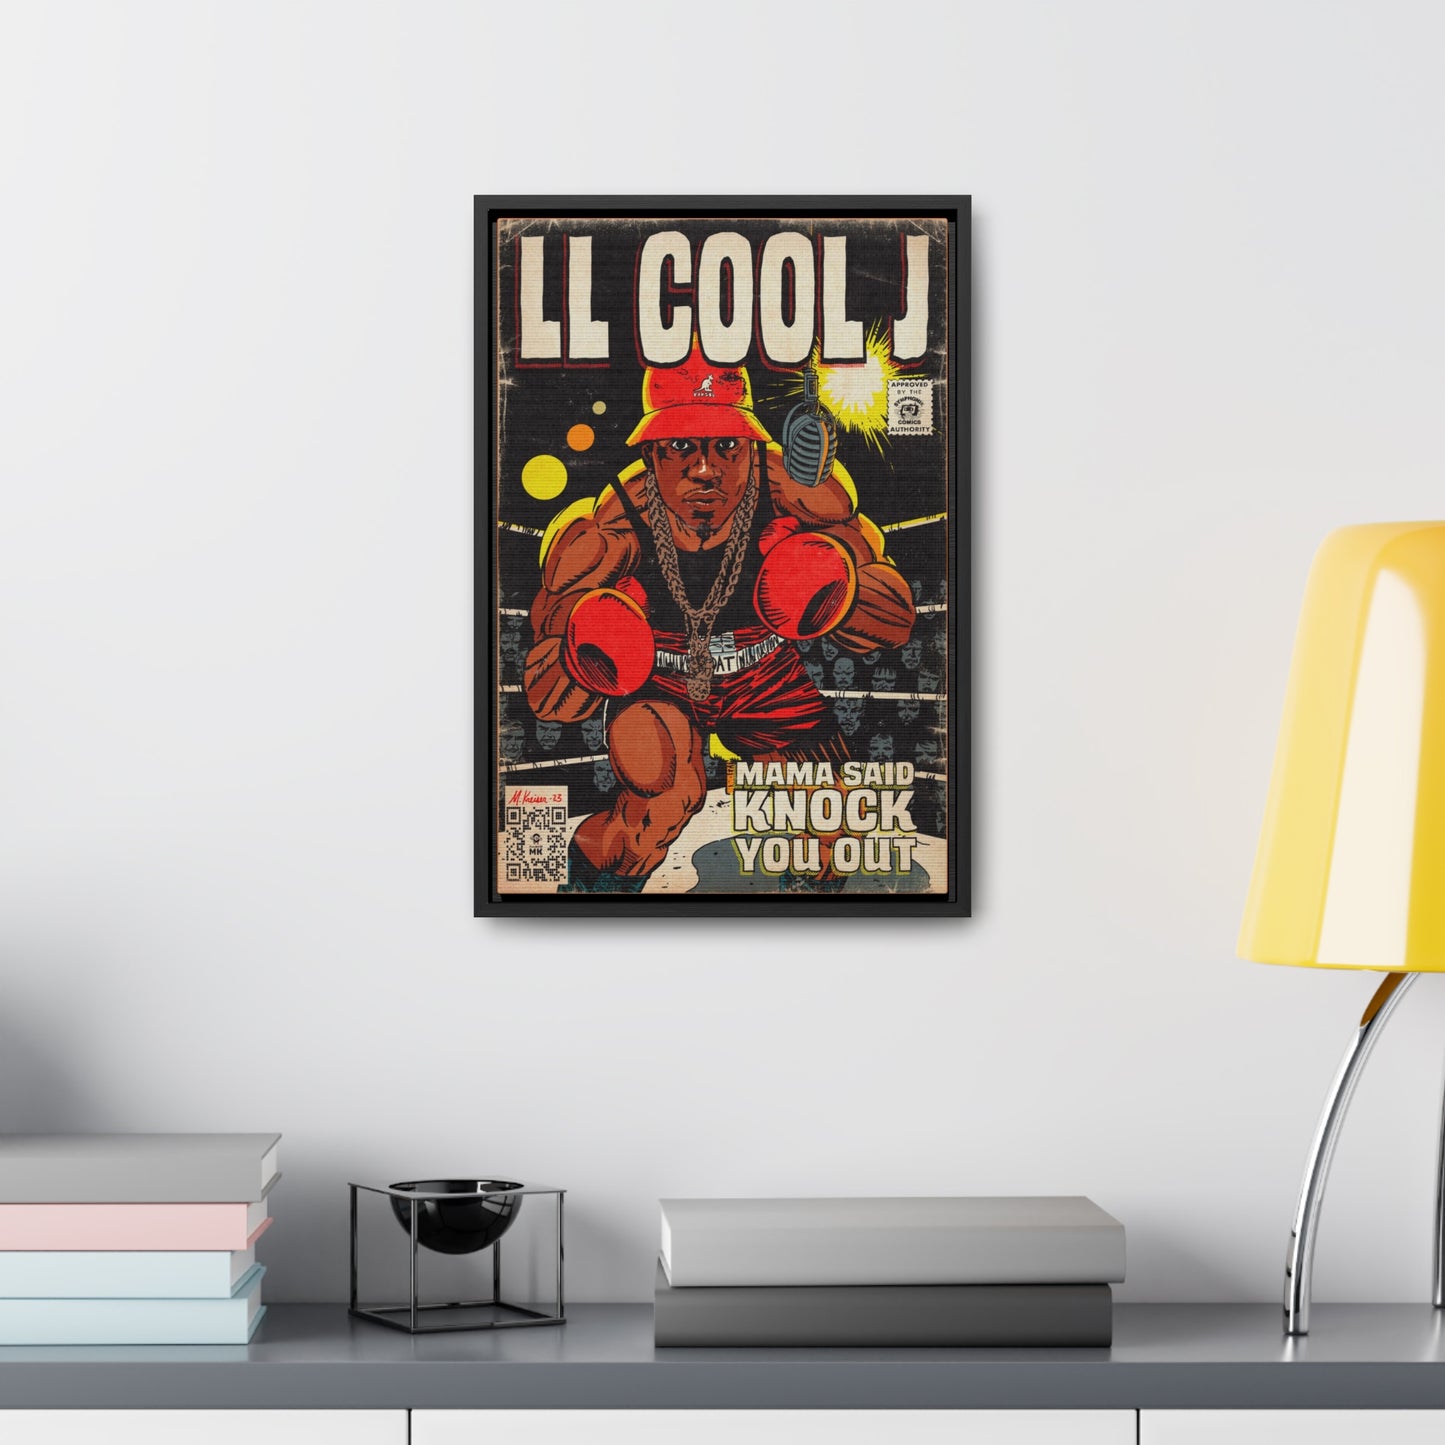 LL Cool J - Mama Said Knock You Out - Gallery Canvas Wraps, Vertical Frame